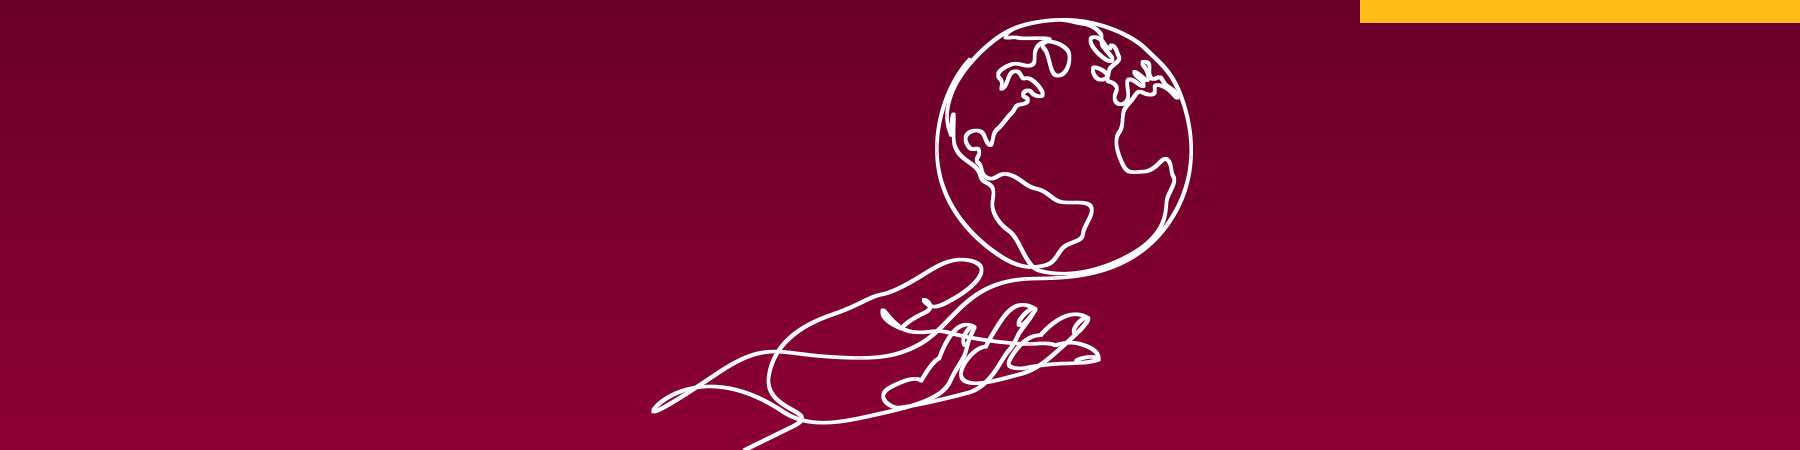 White line illustration of a hand holding a globe, against a maroon background, to demonstrate Loyola University Chicago's media and public relations efforts.